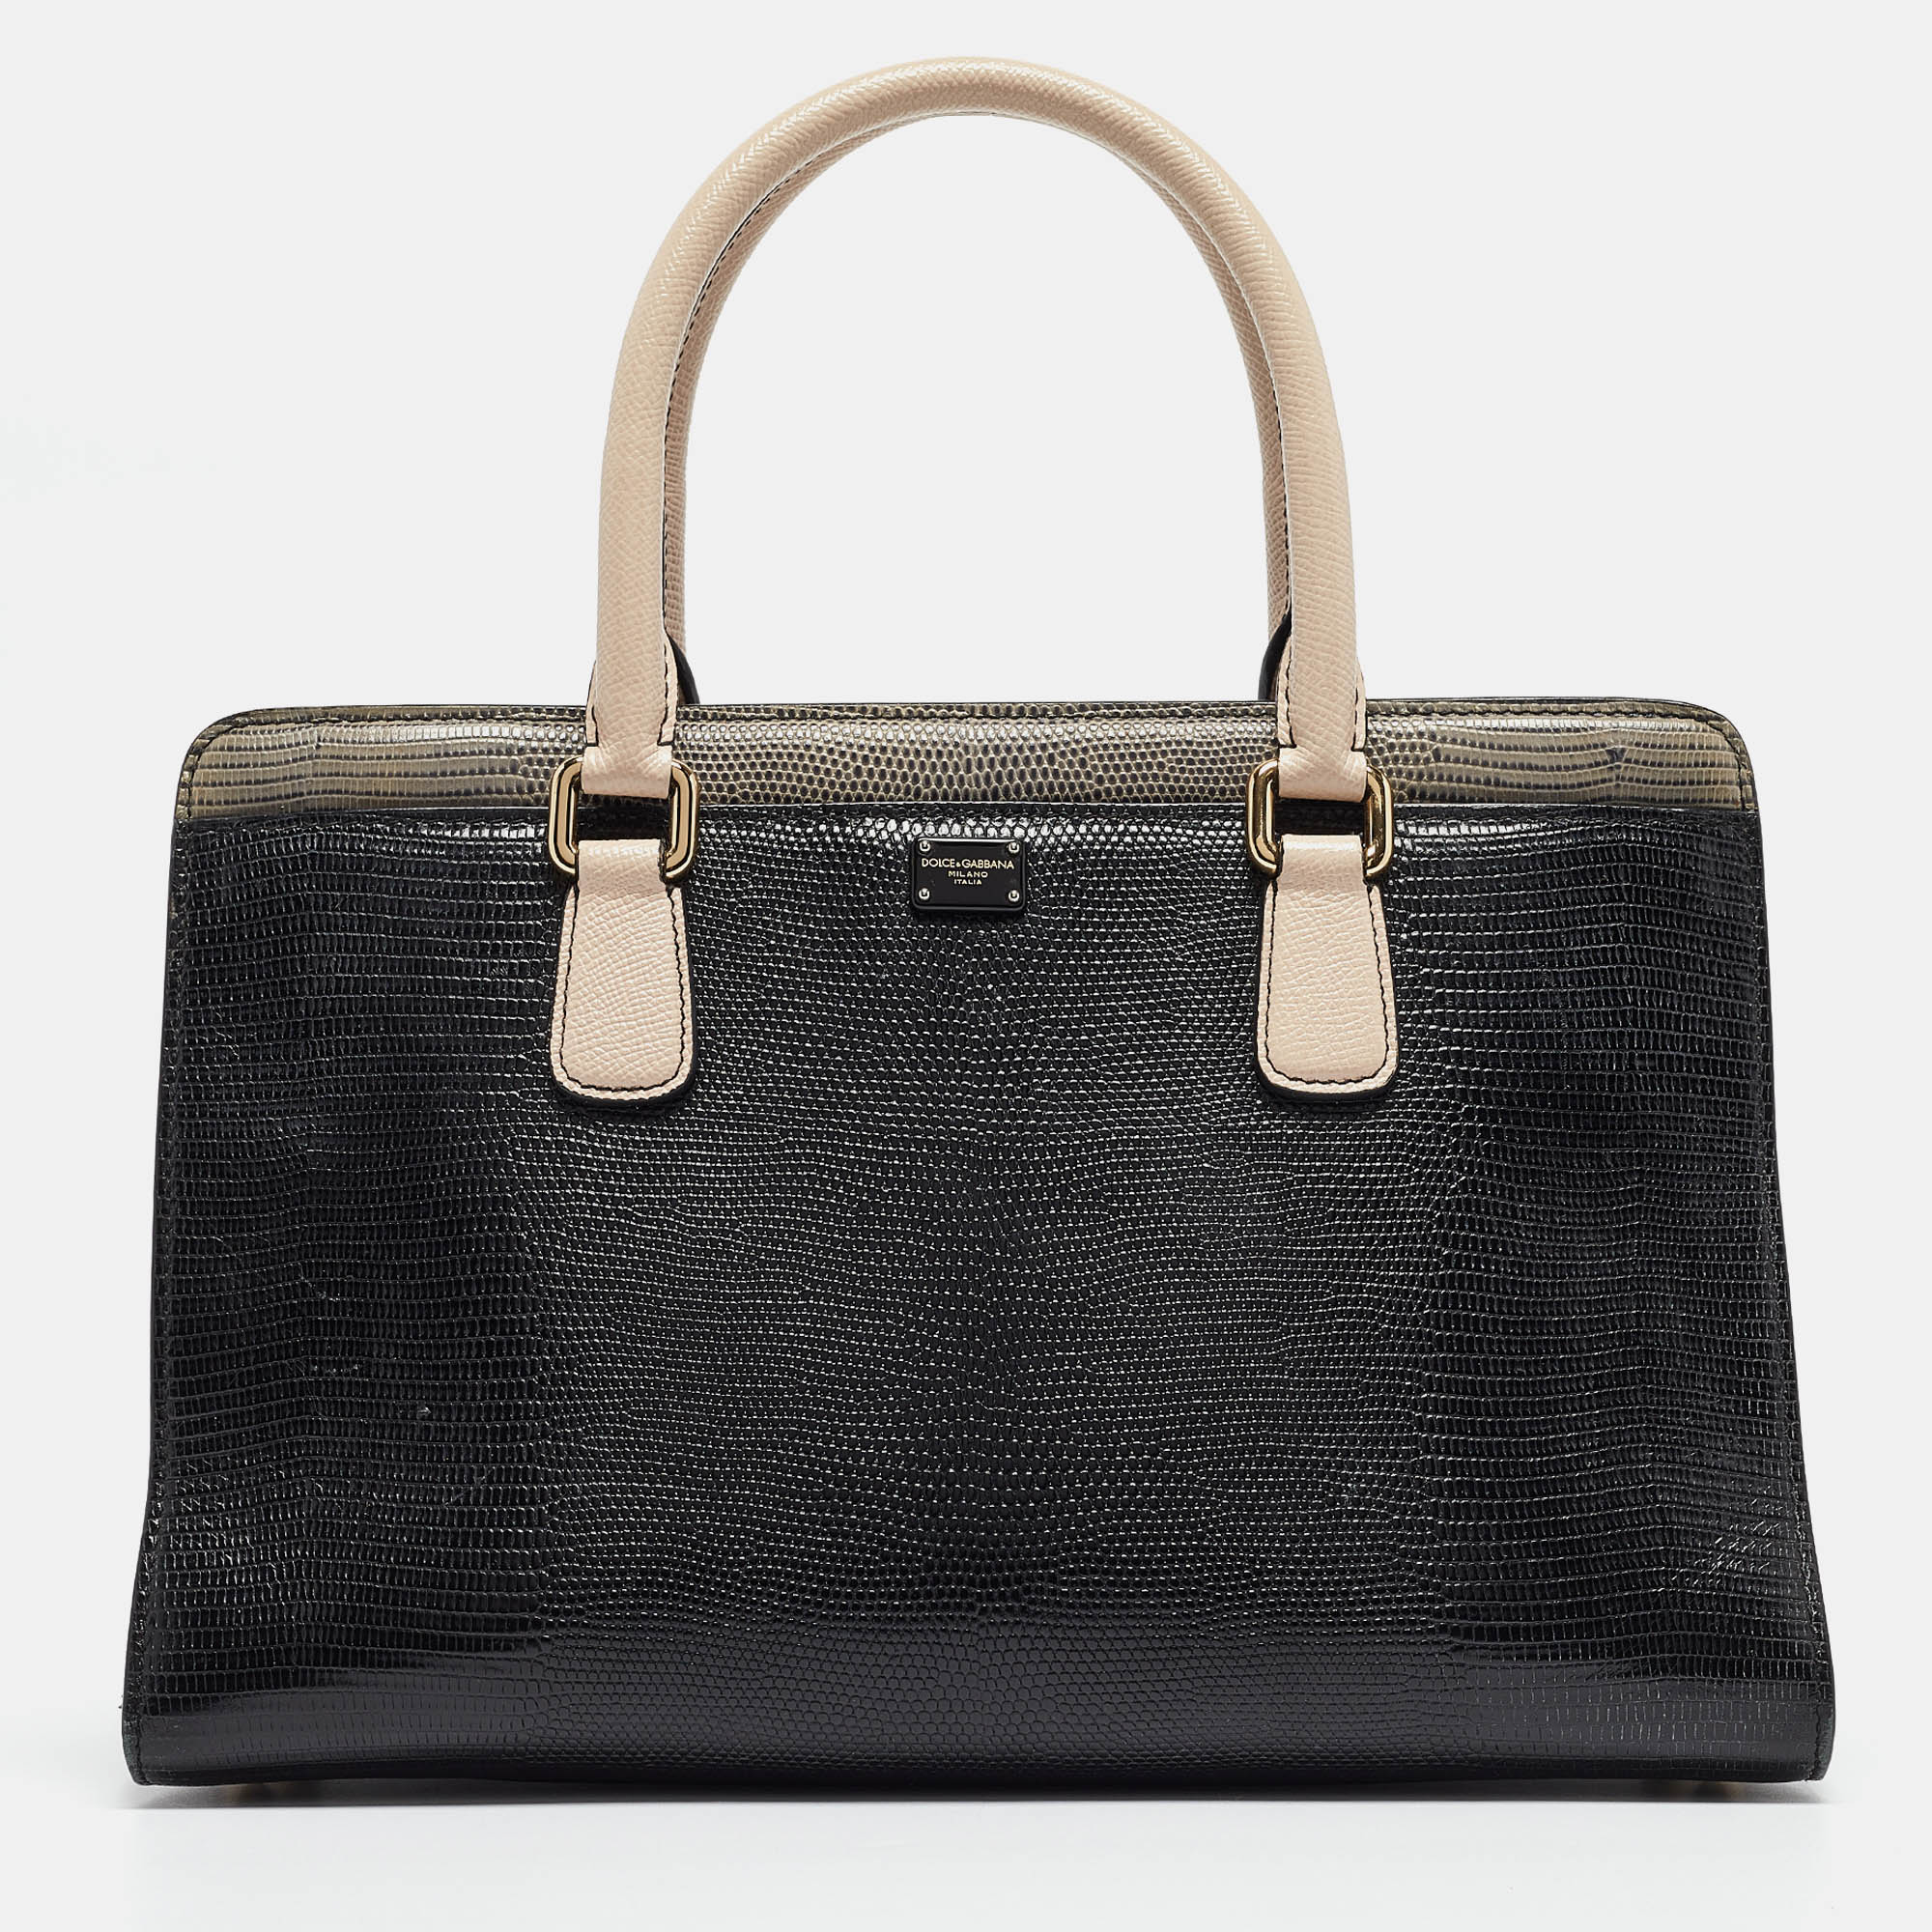 This alluring Dolce and Gabbana tote bag for women has been designed to assist you on any day. Convenient to carry and fashionably designed the tote is cut with skill and sewn into a great shape. It is well equipped to be a reliable accessory.